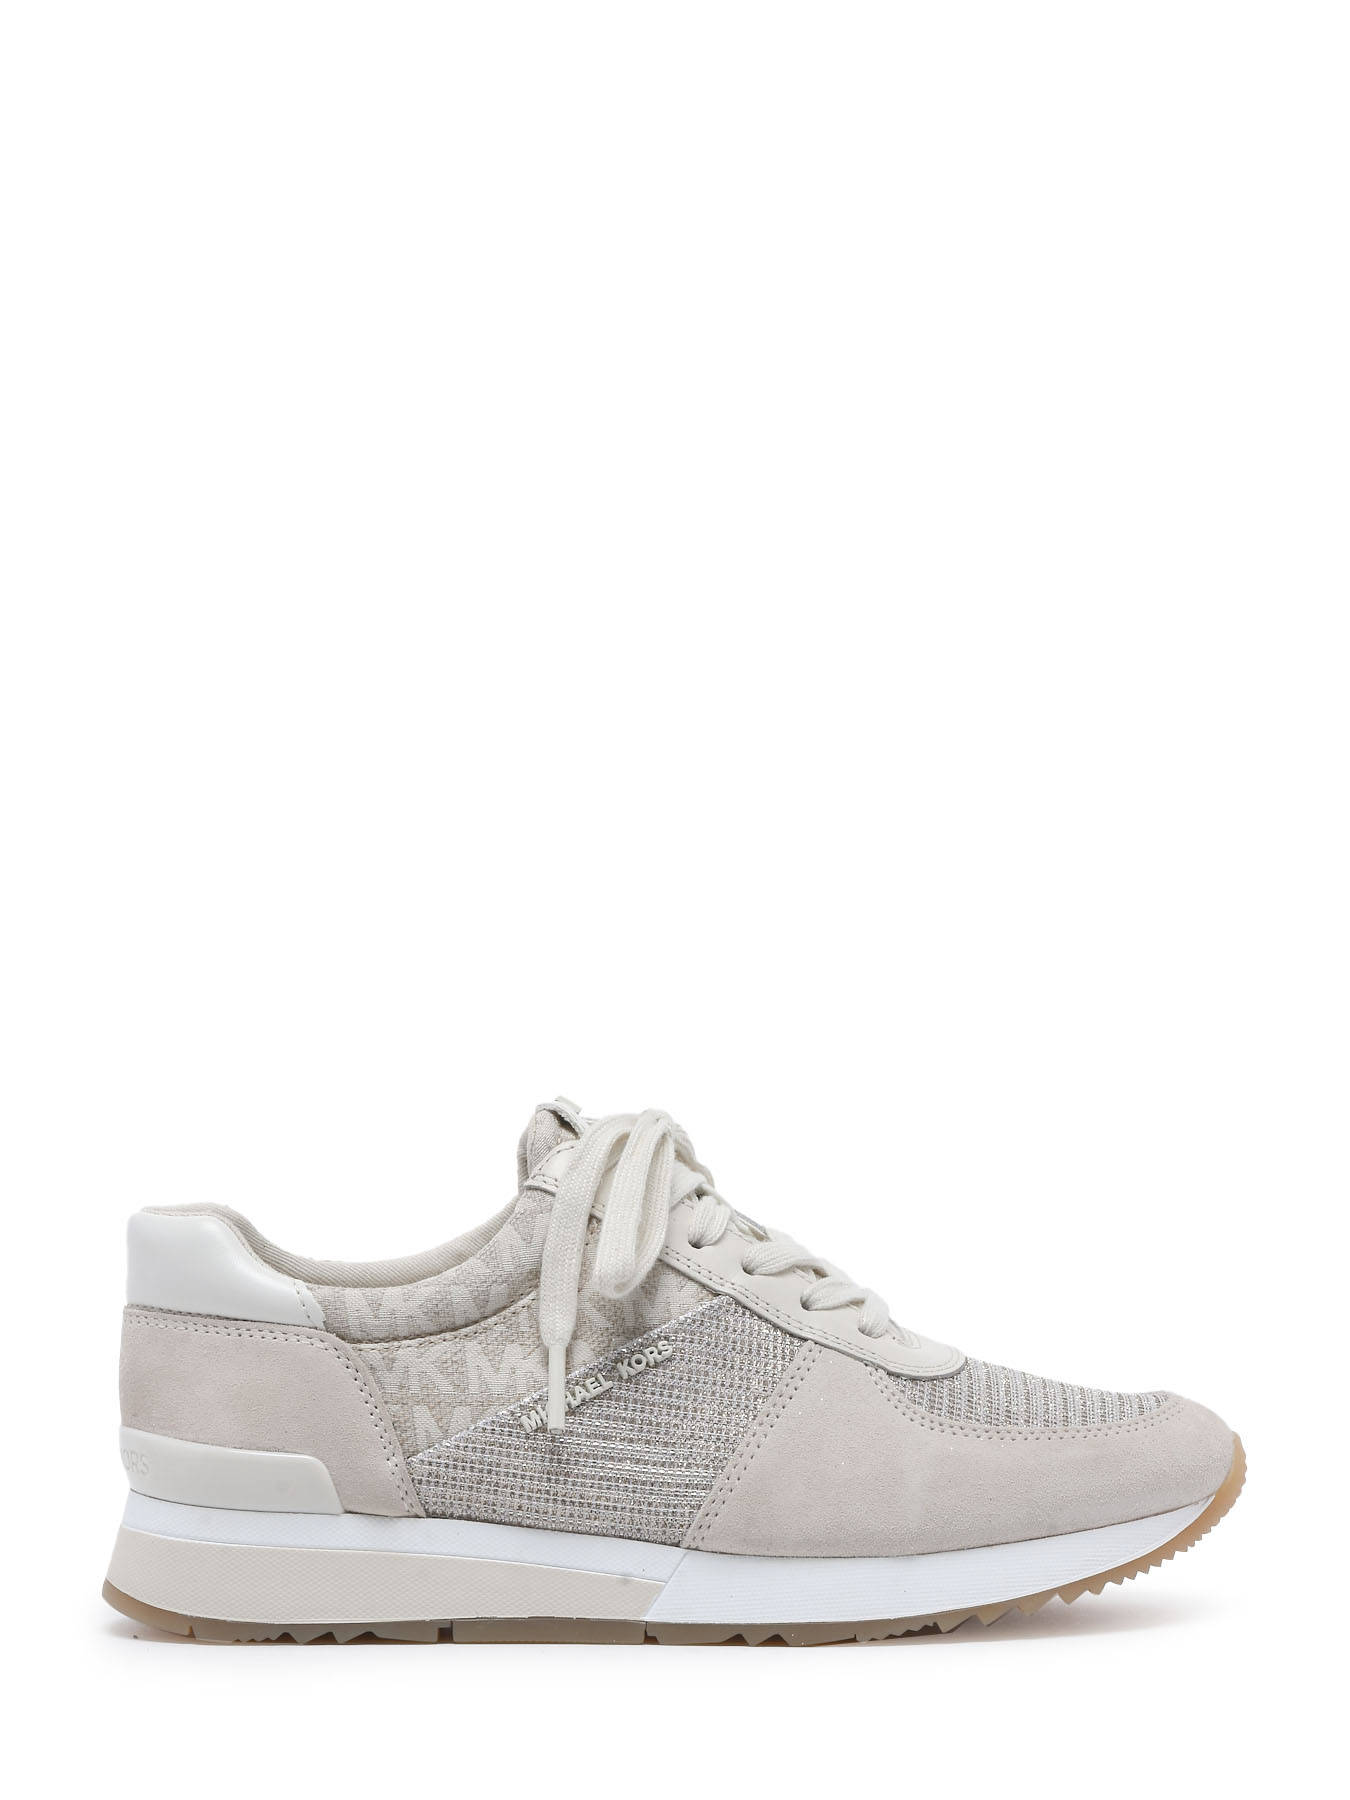 Michael Kors Allie Trainer Natural  LowTop Sneaker  fashionette